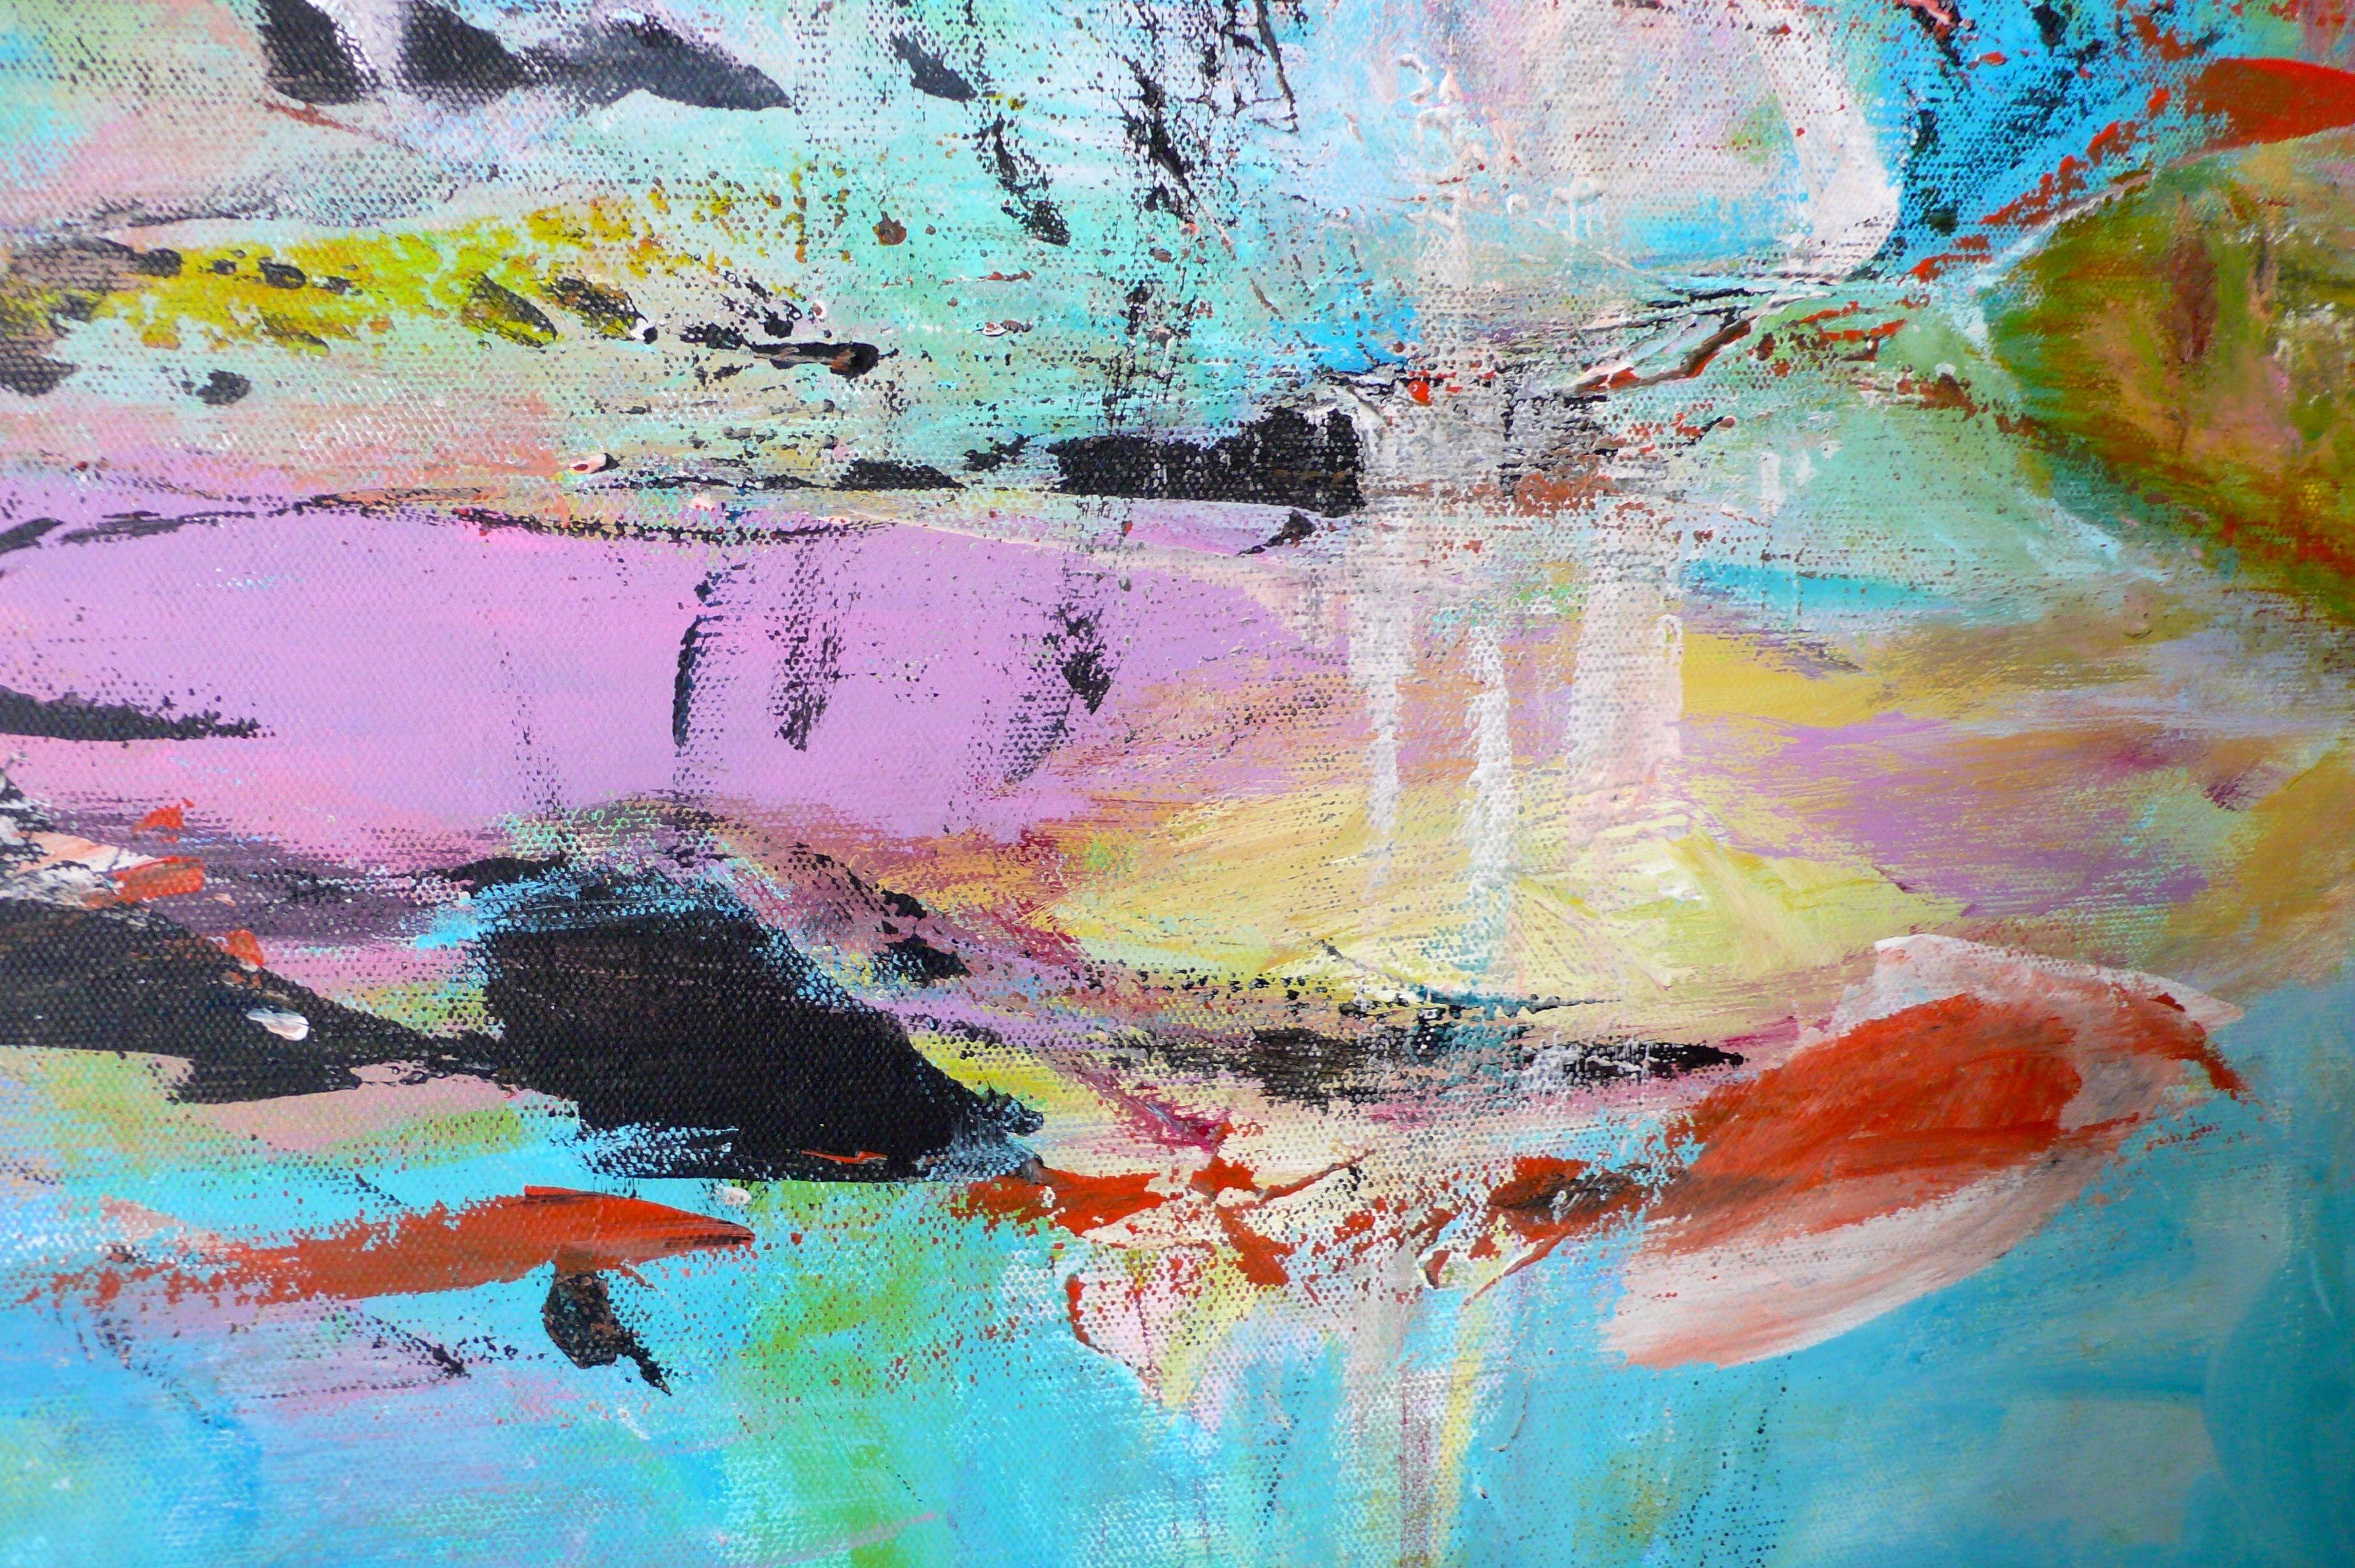 Phantoms of the Sea, Painting, Acrylic on Canvas - Gray Abstract Painting by Christel Haag